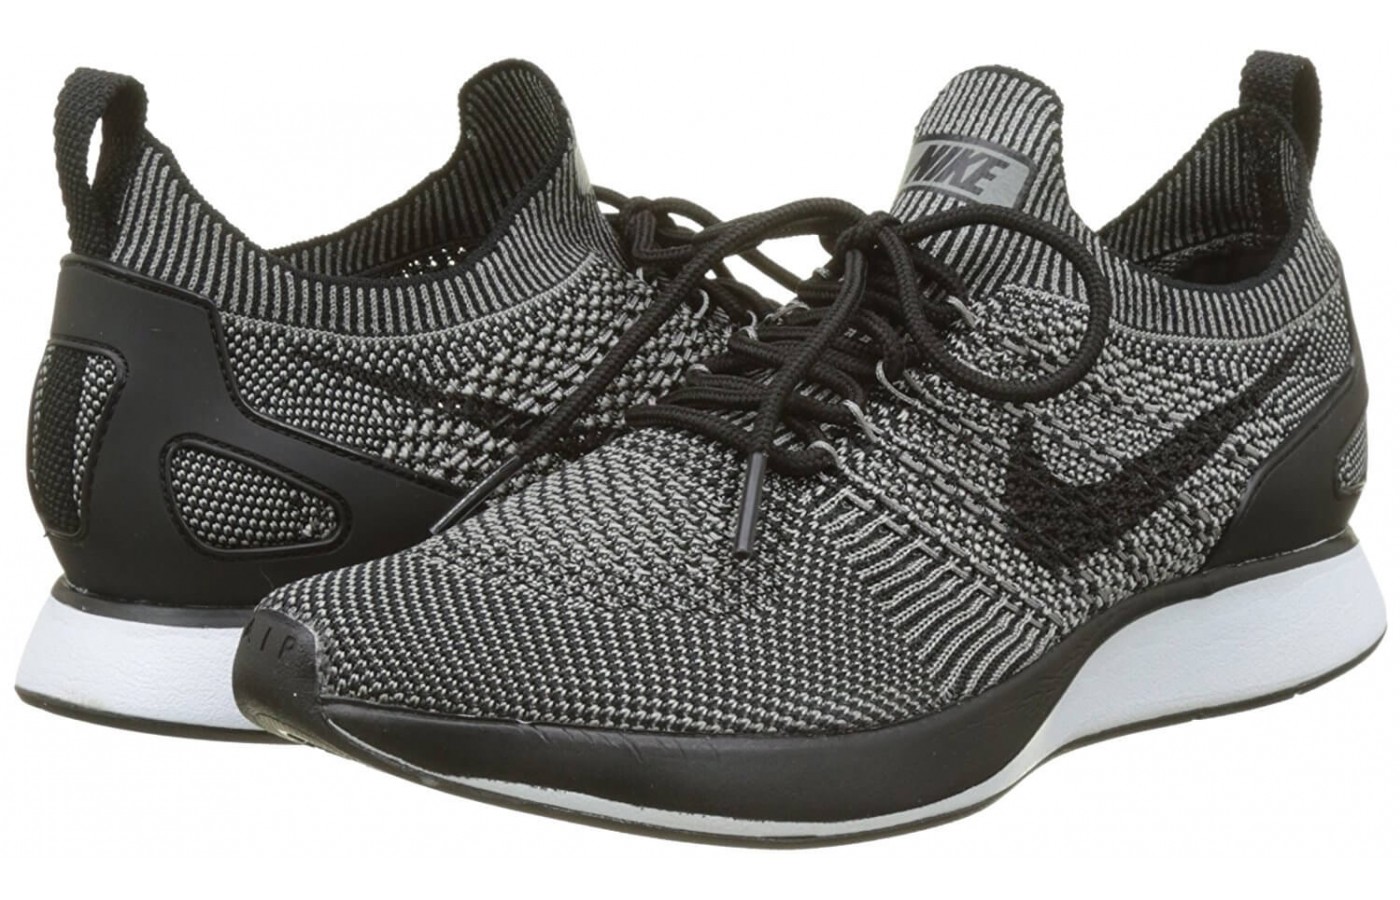 The The Nike Air Zoom Mariah Flyknit Racer features a sock-like upper